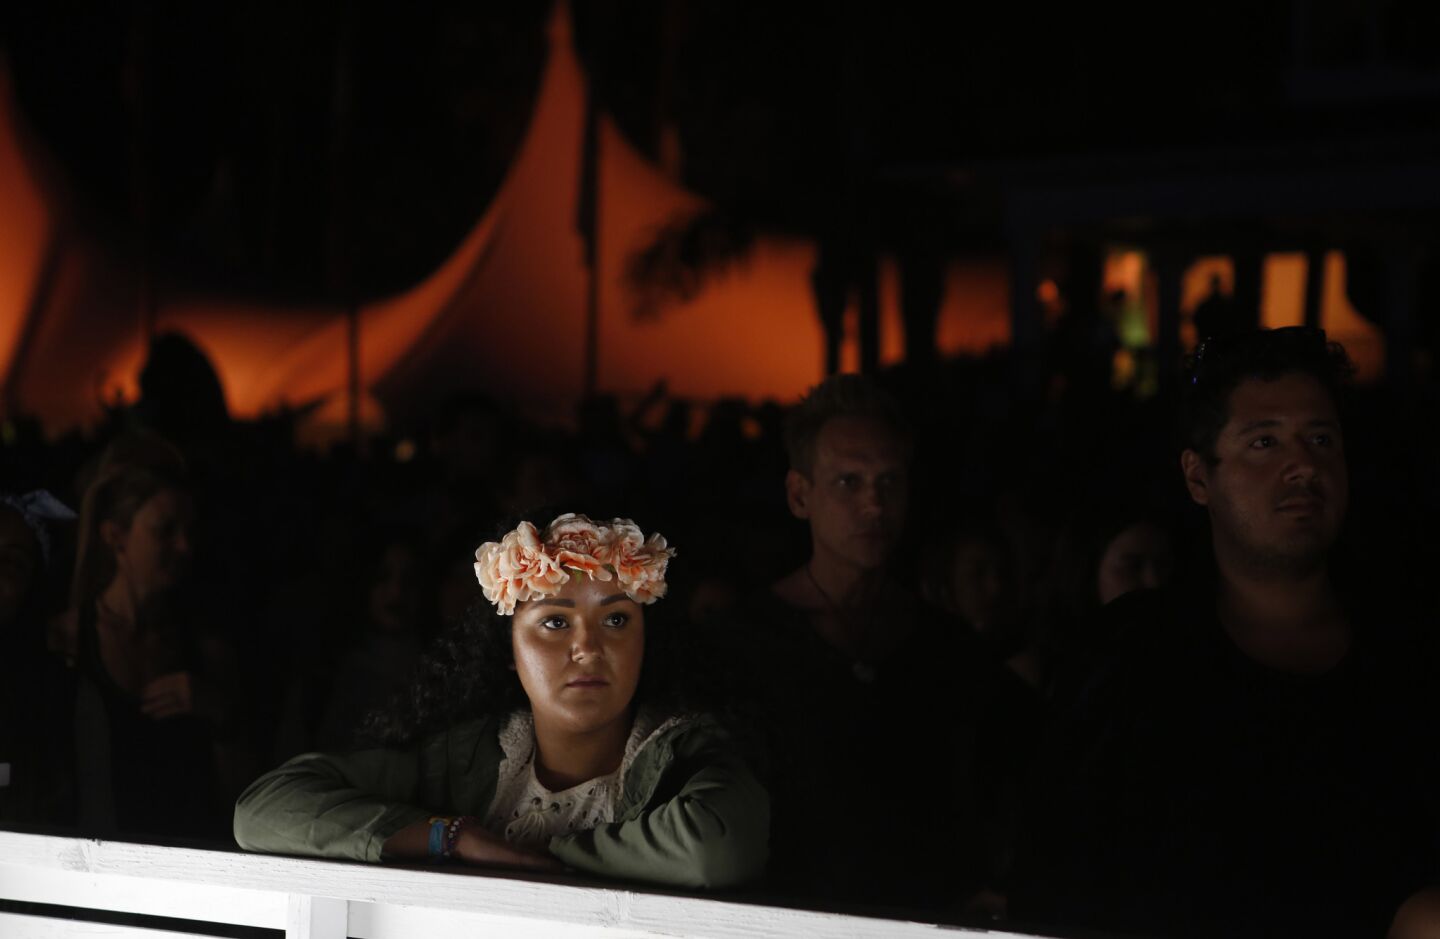 Fans watch Ice Cube's performance at the Coachella Valley Music and Arts Festival.